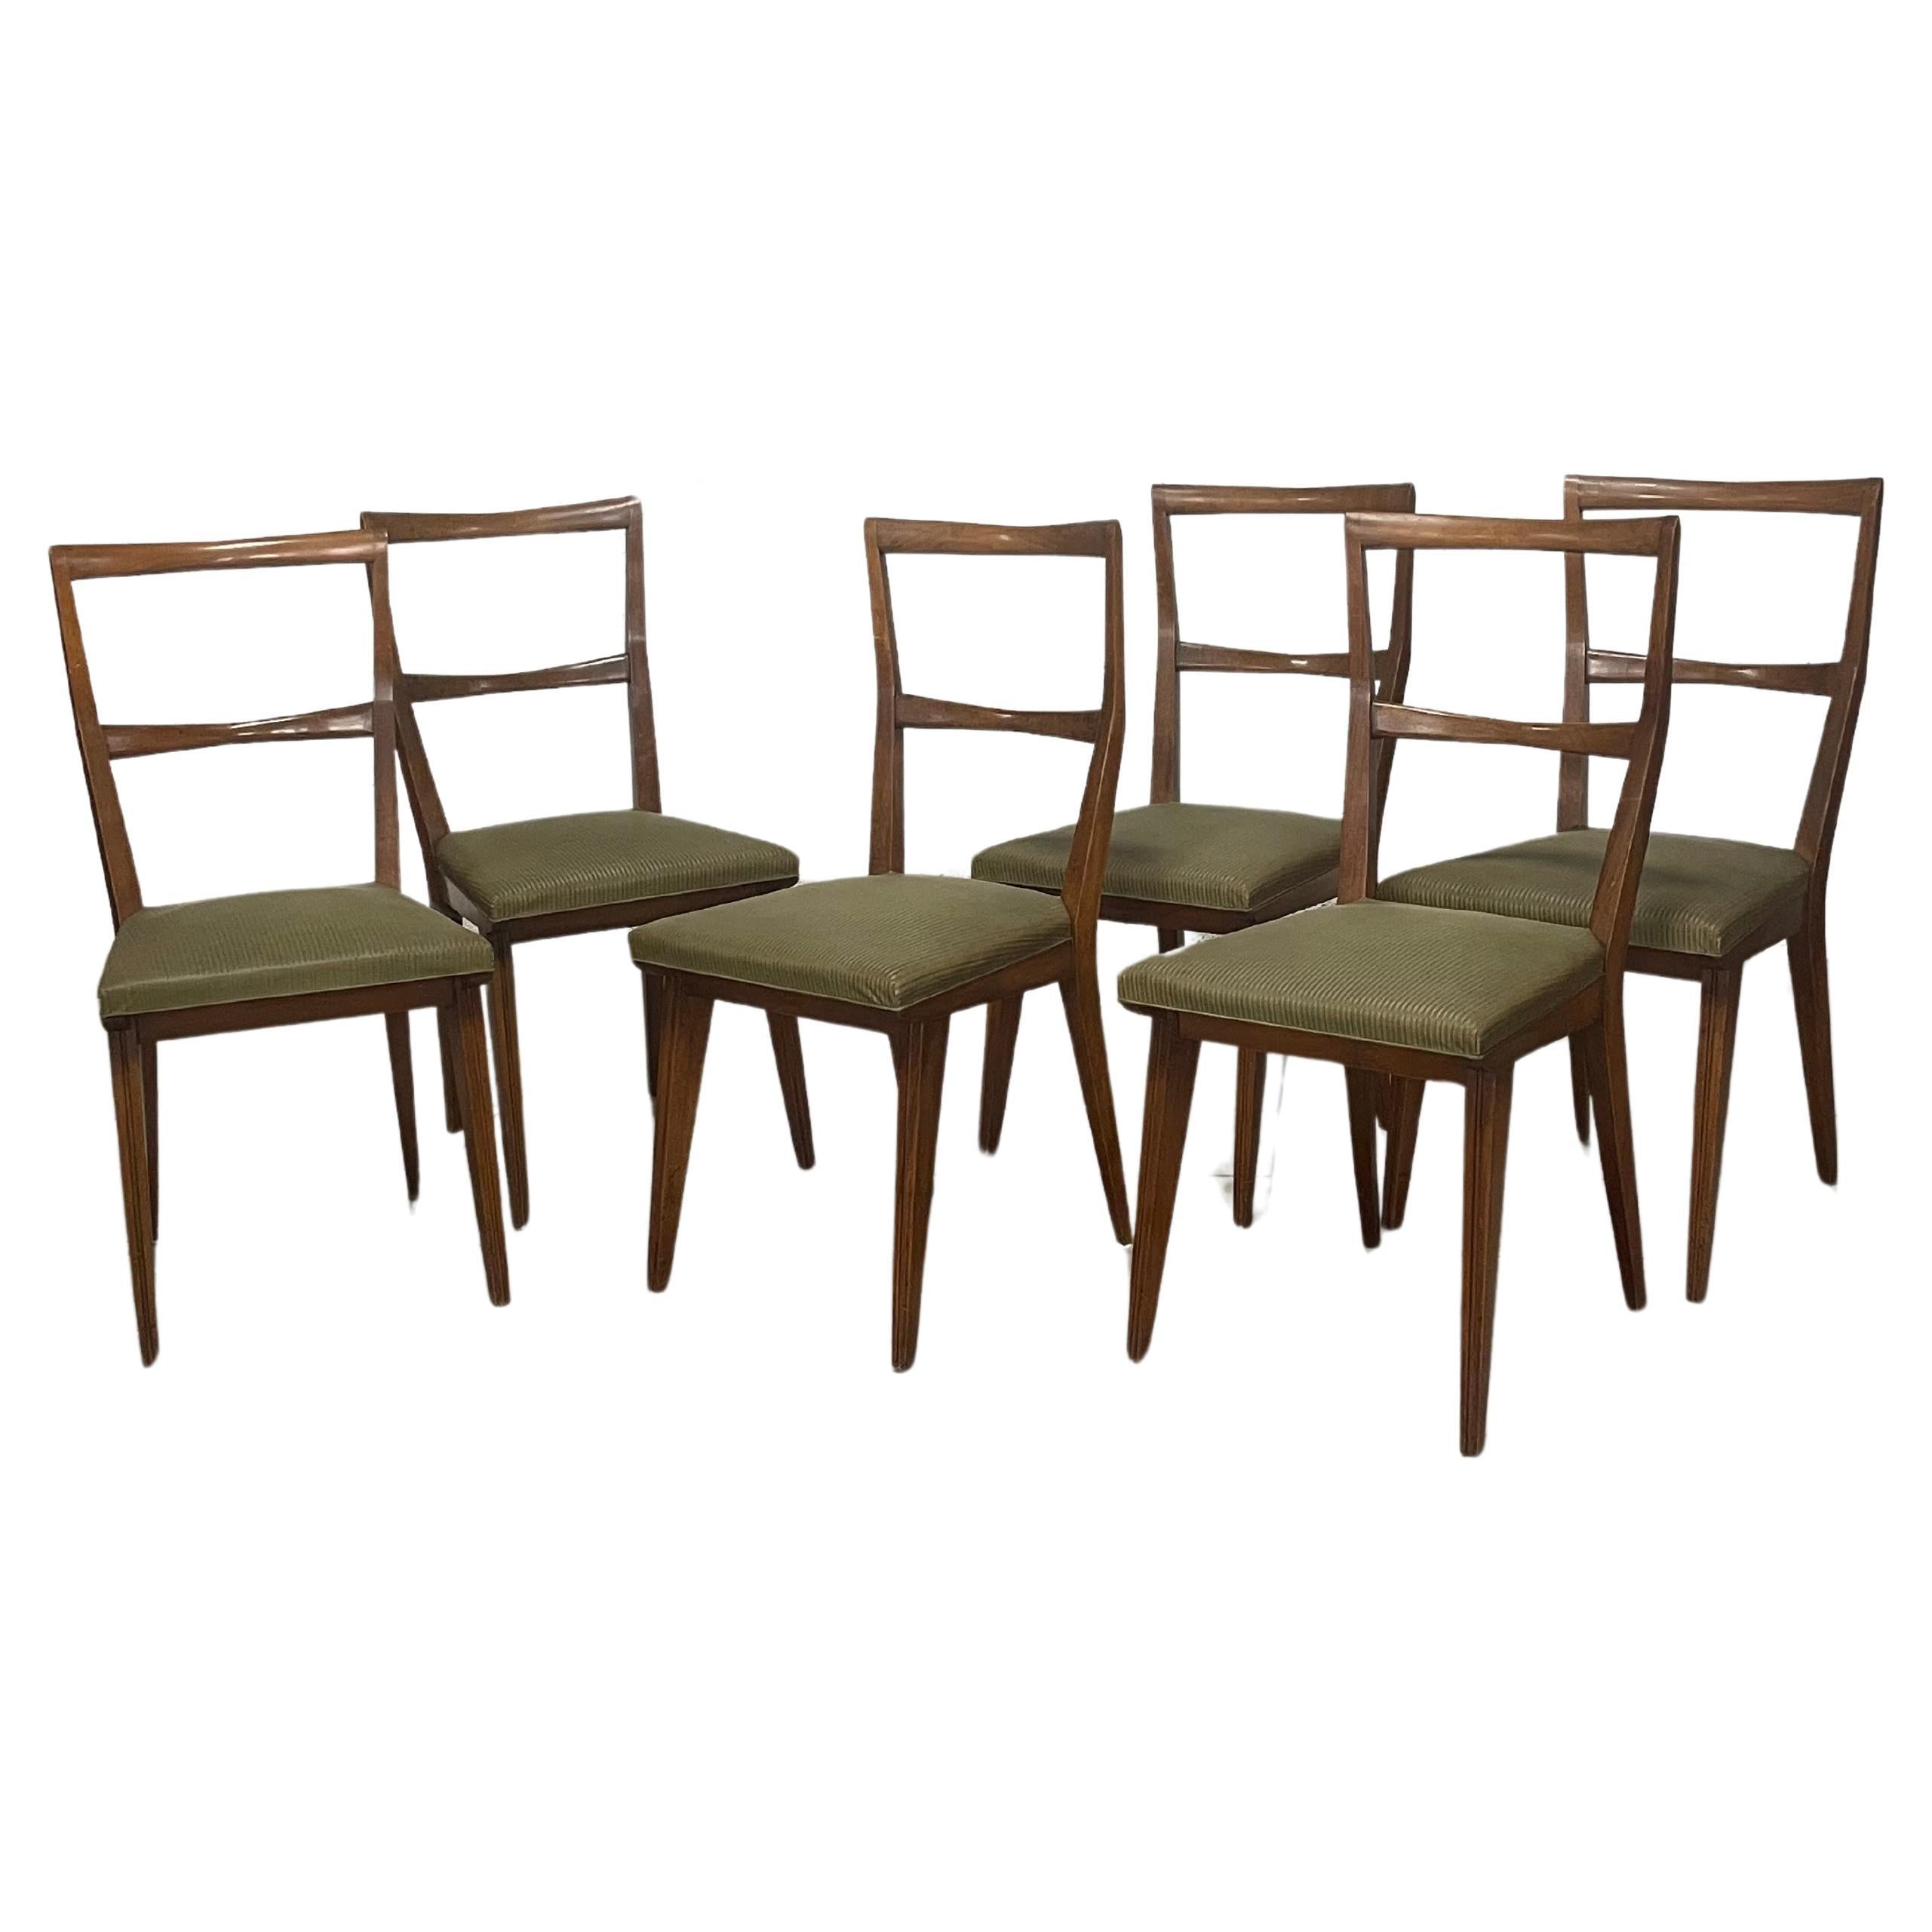 Set of 6 walnut chairs 1960s, Italian manufacture For Sale